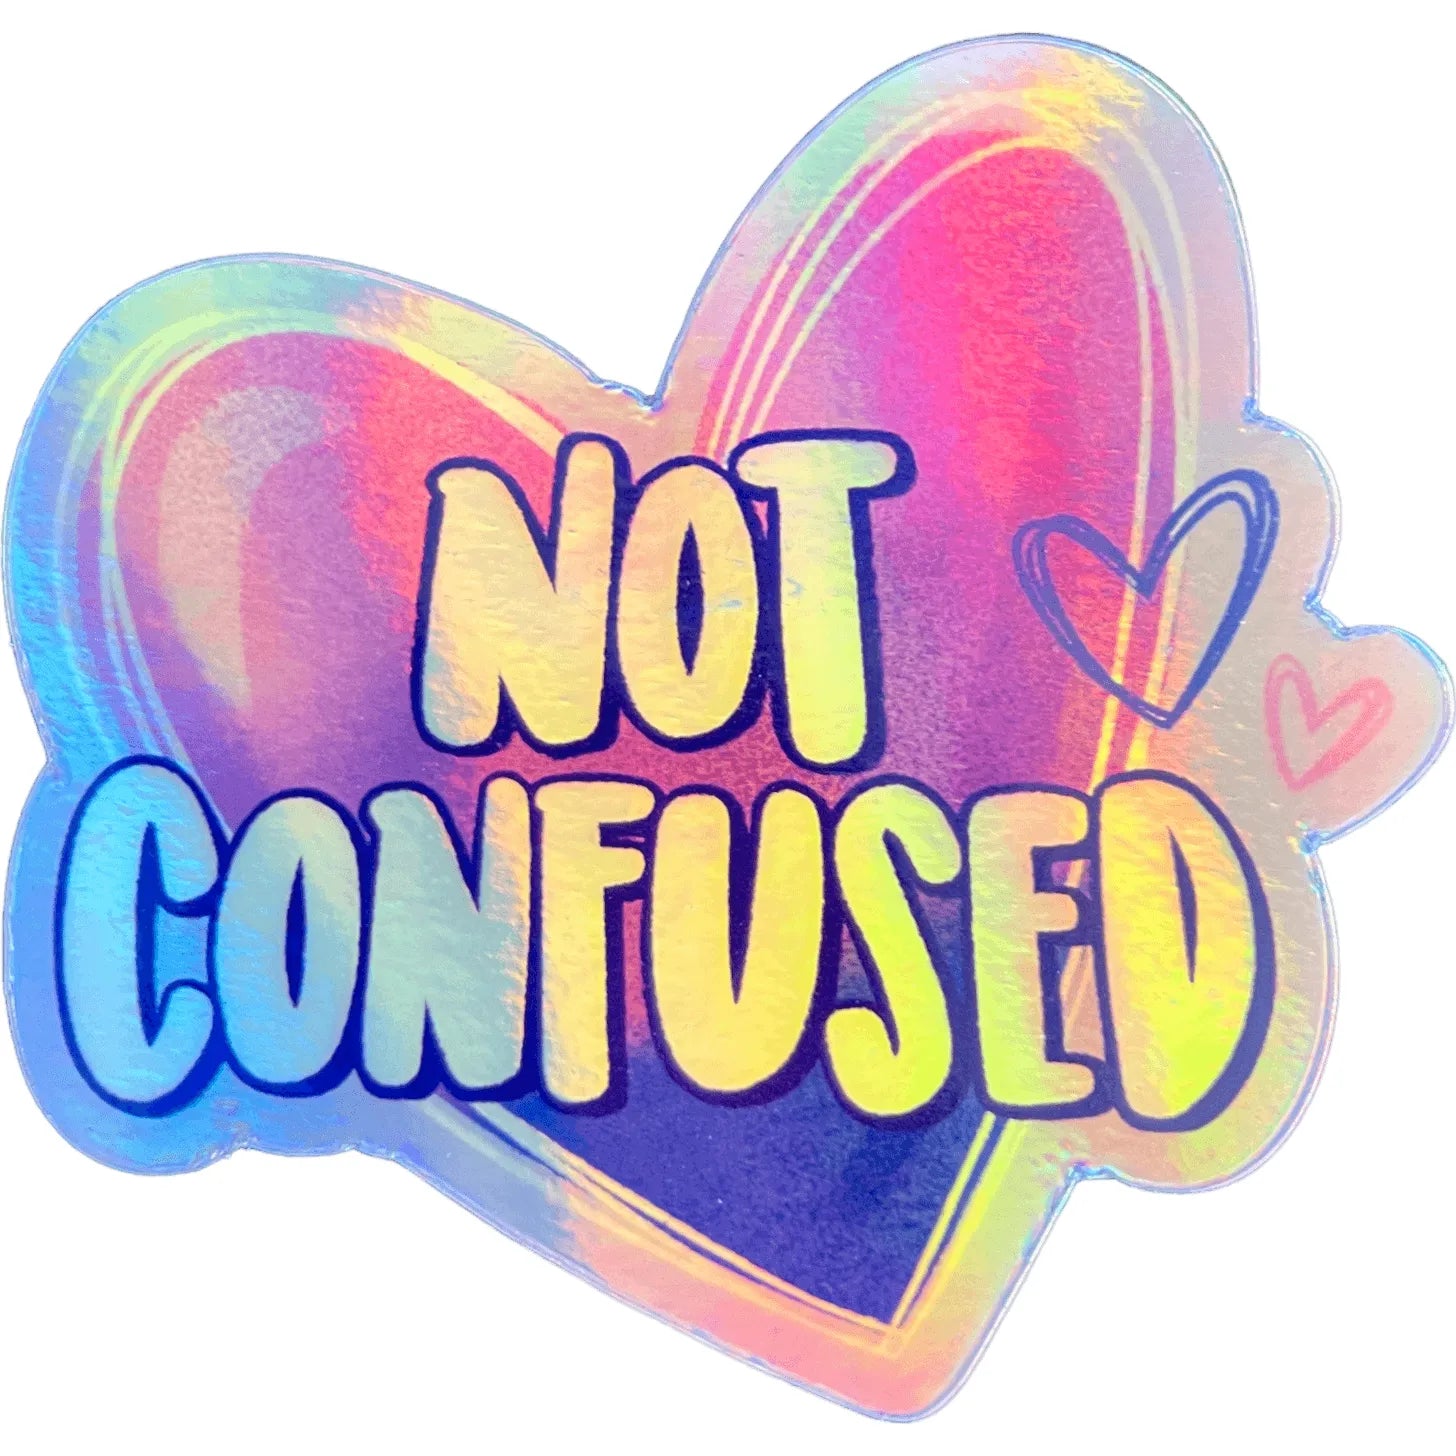 Not Confused Pride Heart Sticker